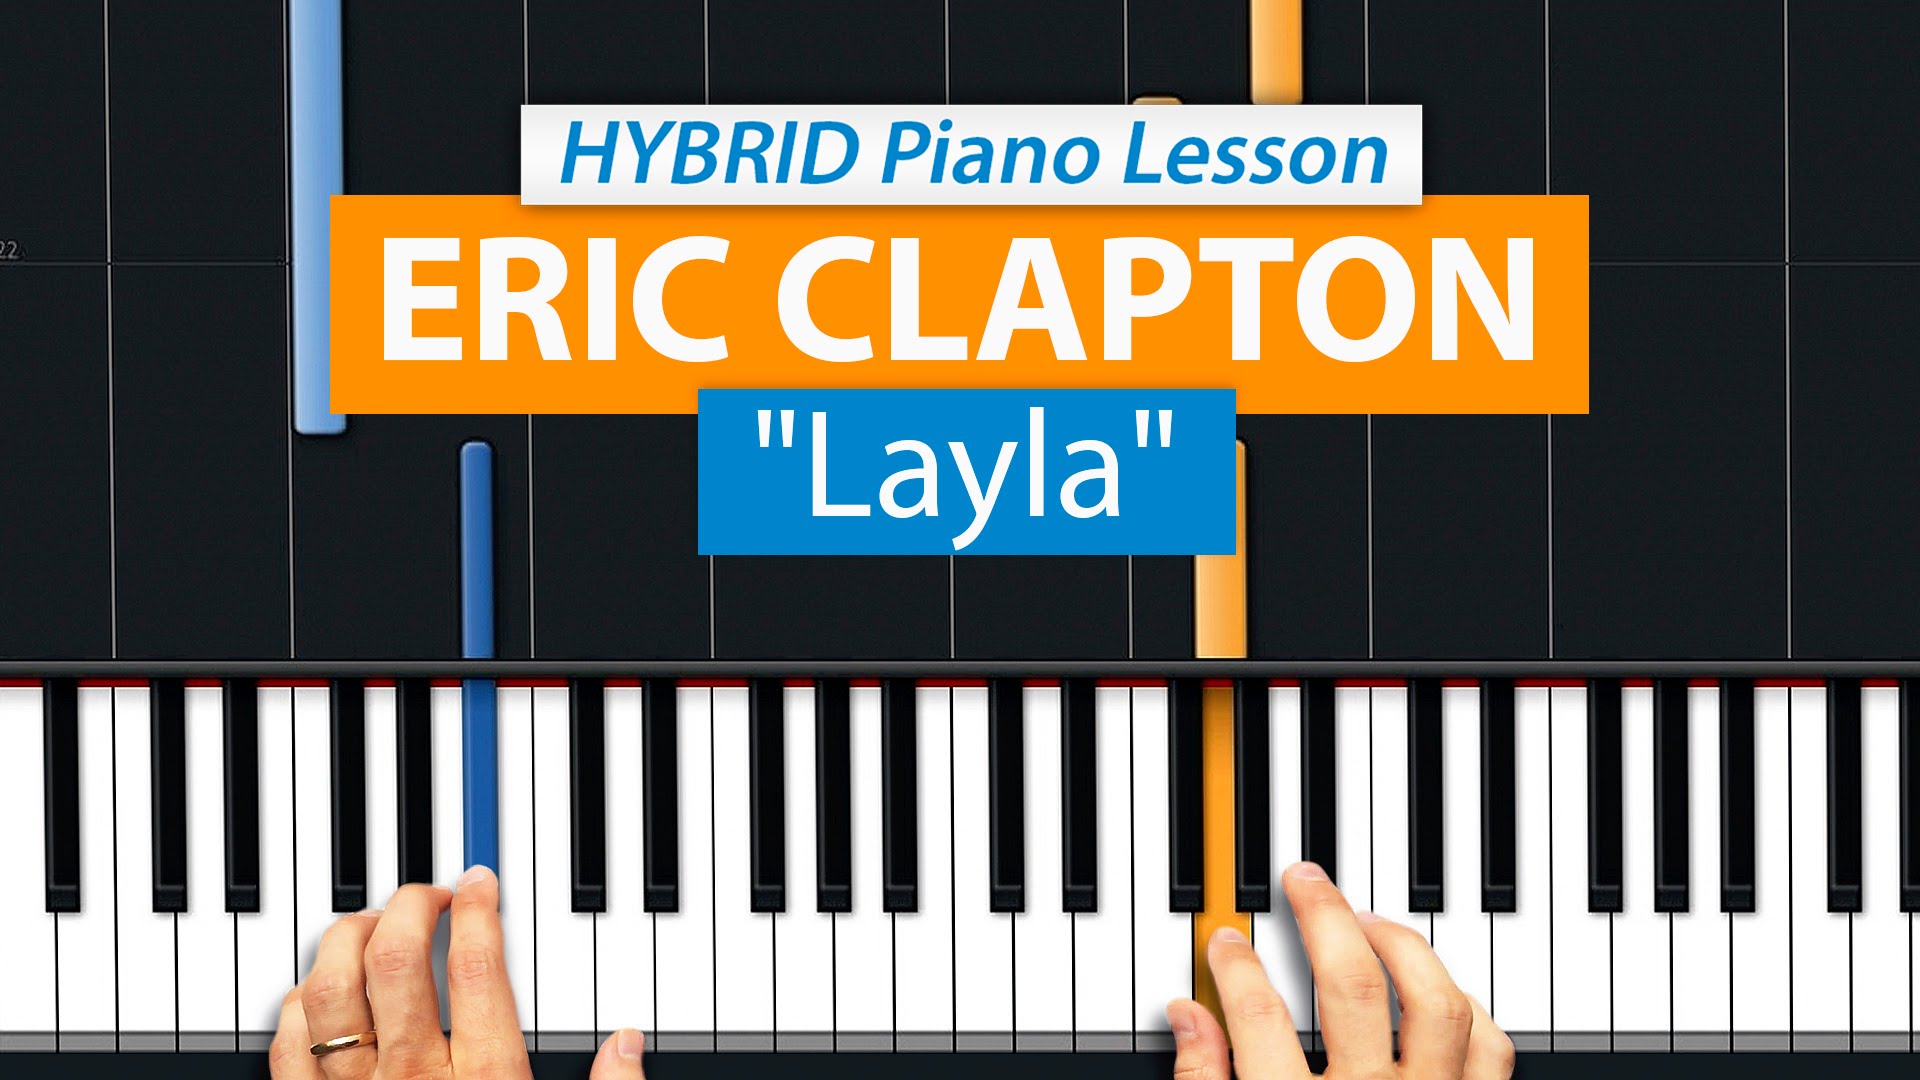 Layla Hdpiano Drummer jim gordon came up with it as a solo project and had to be convinced to use it on layla. gordon was one of the most successful. layla hdpiano